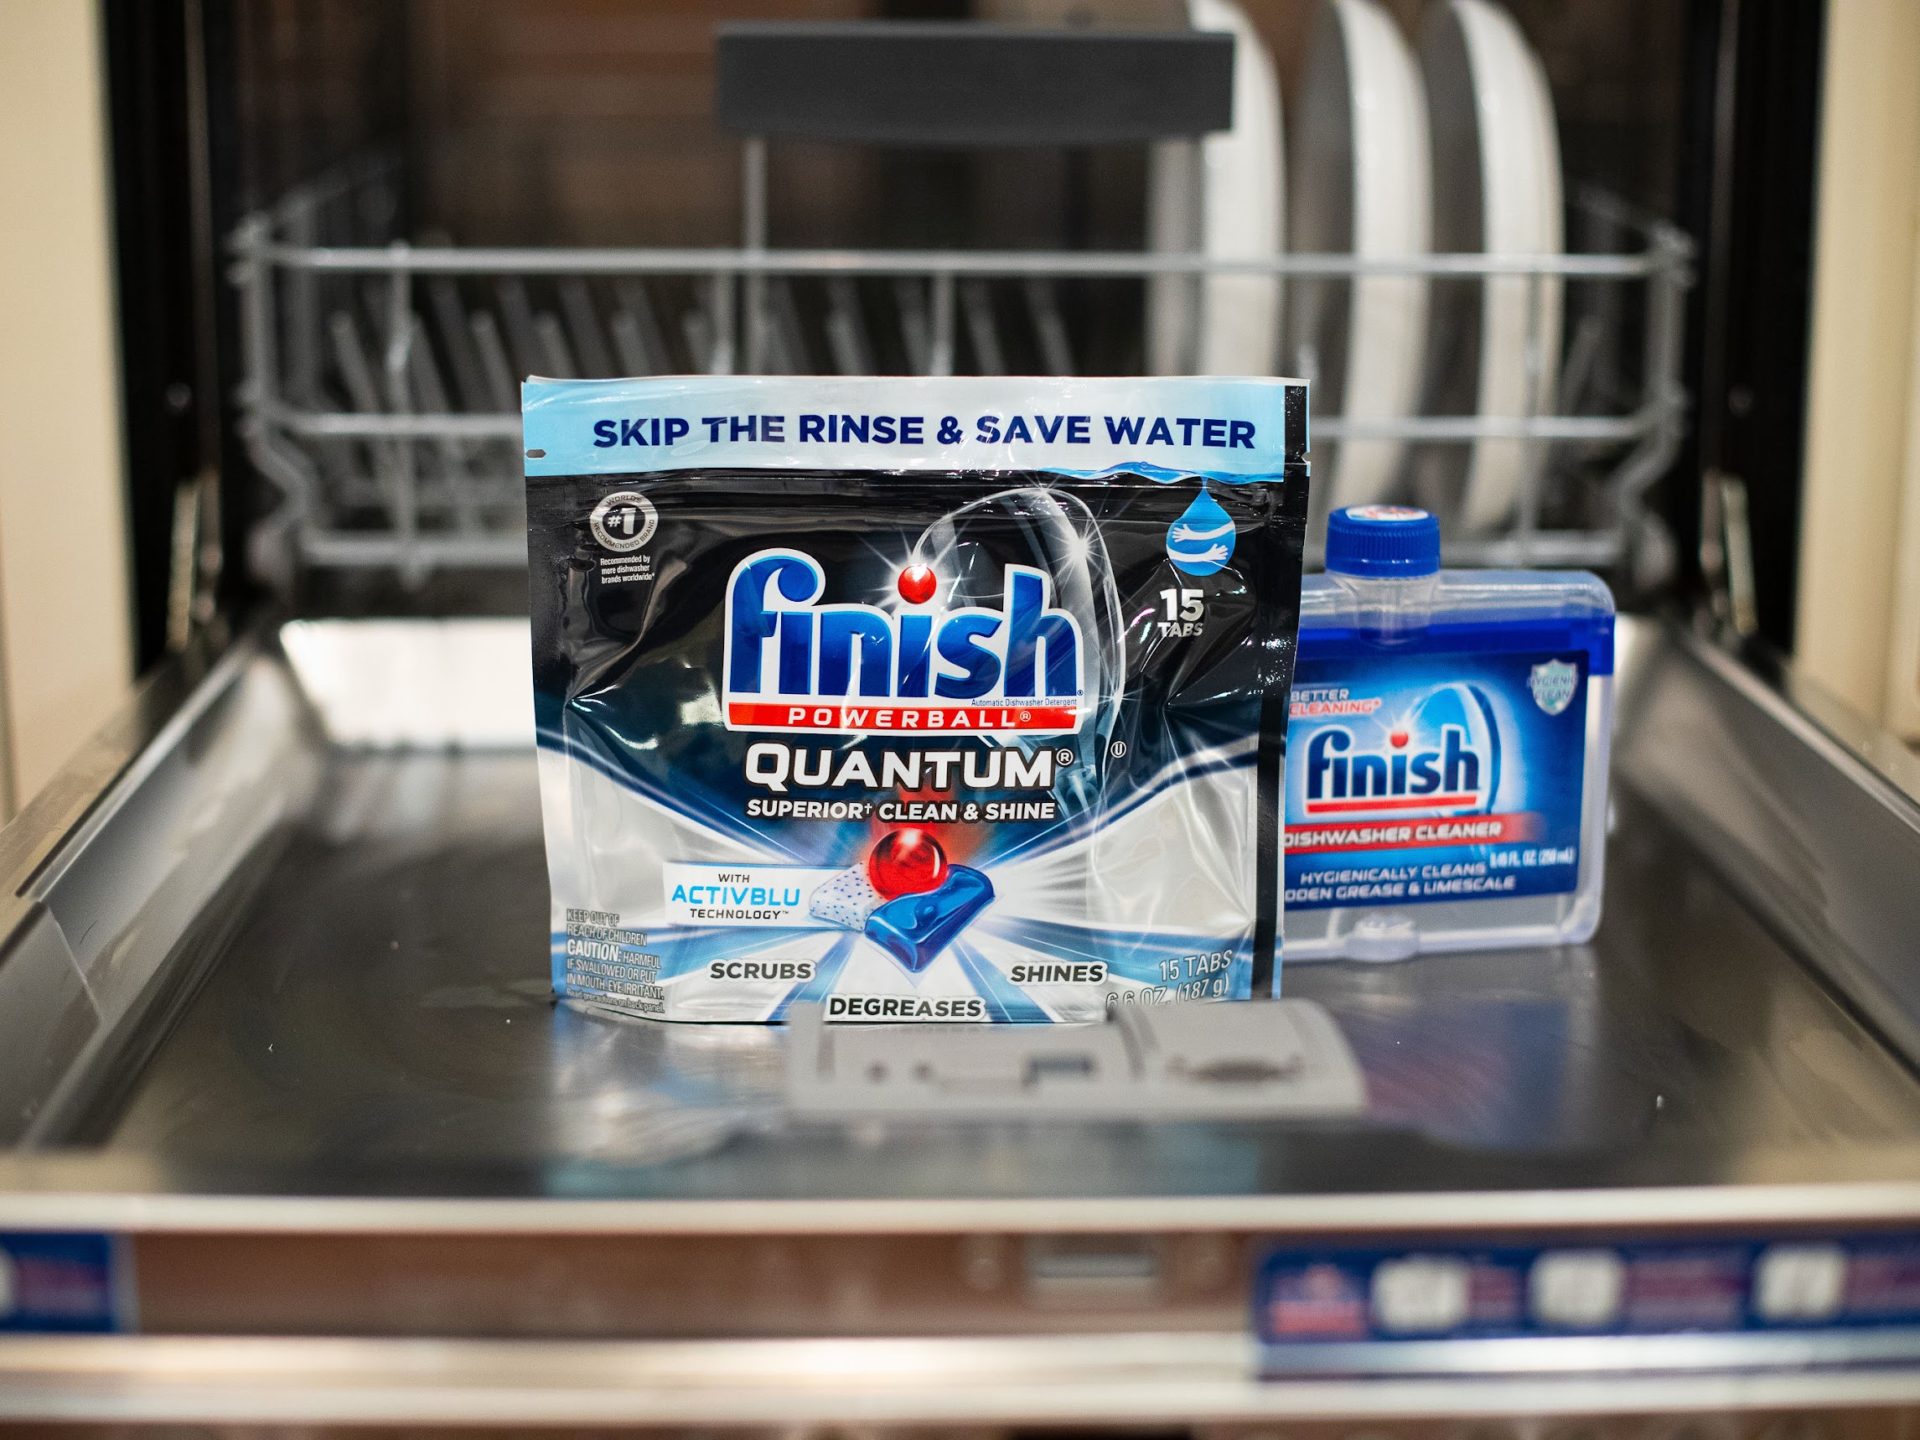 Finish Quantum Detergent As Low As $3.99 At Kroger